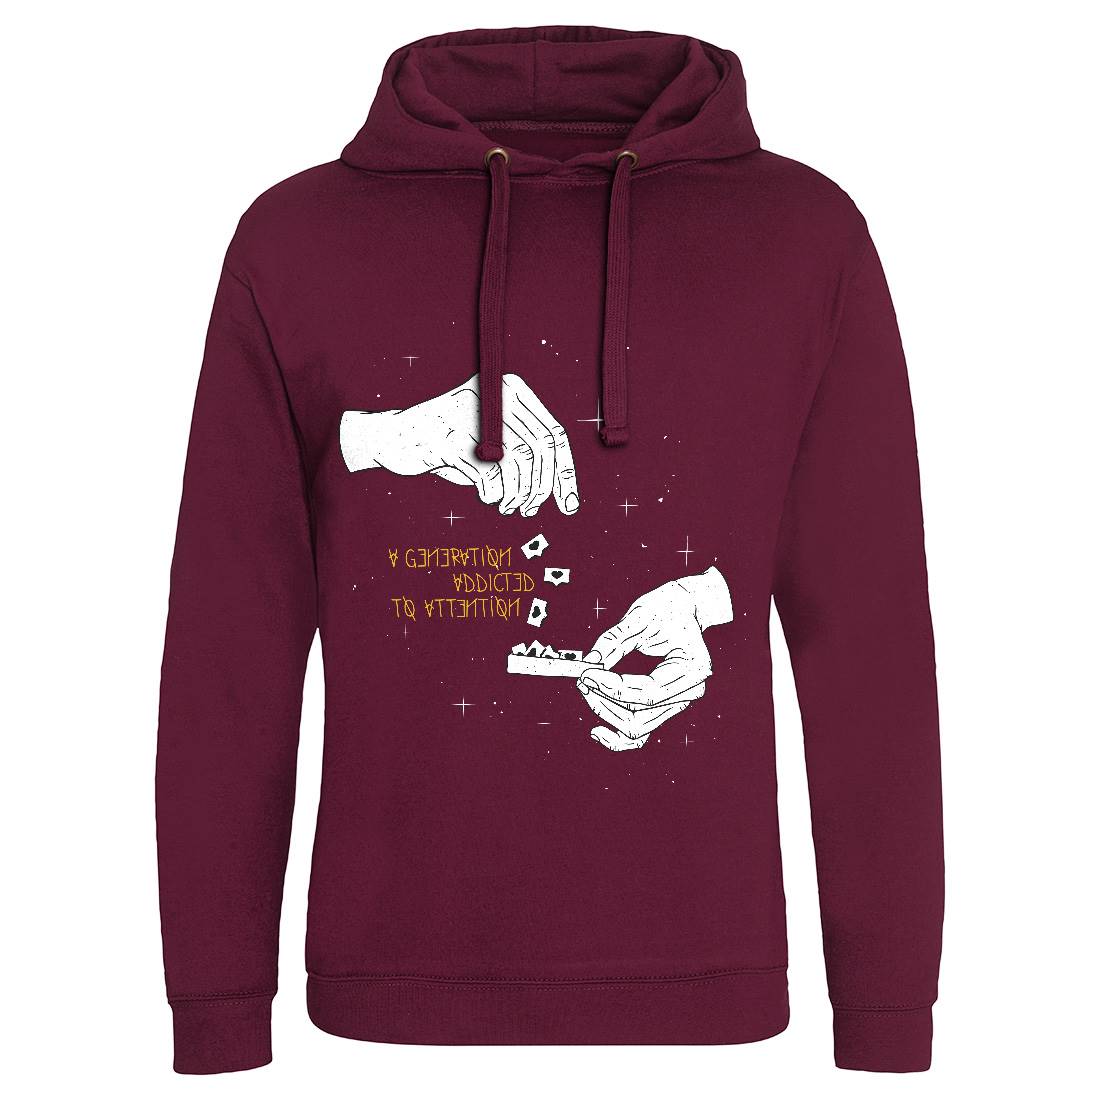 Addicted To Attention Mens Hoodie Without Pocket Media D442